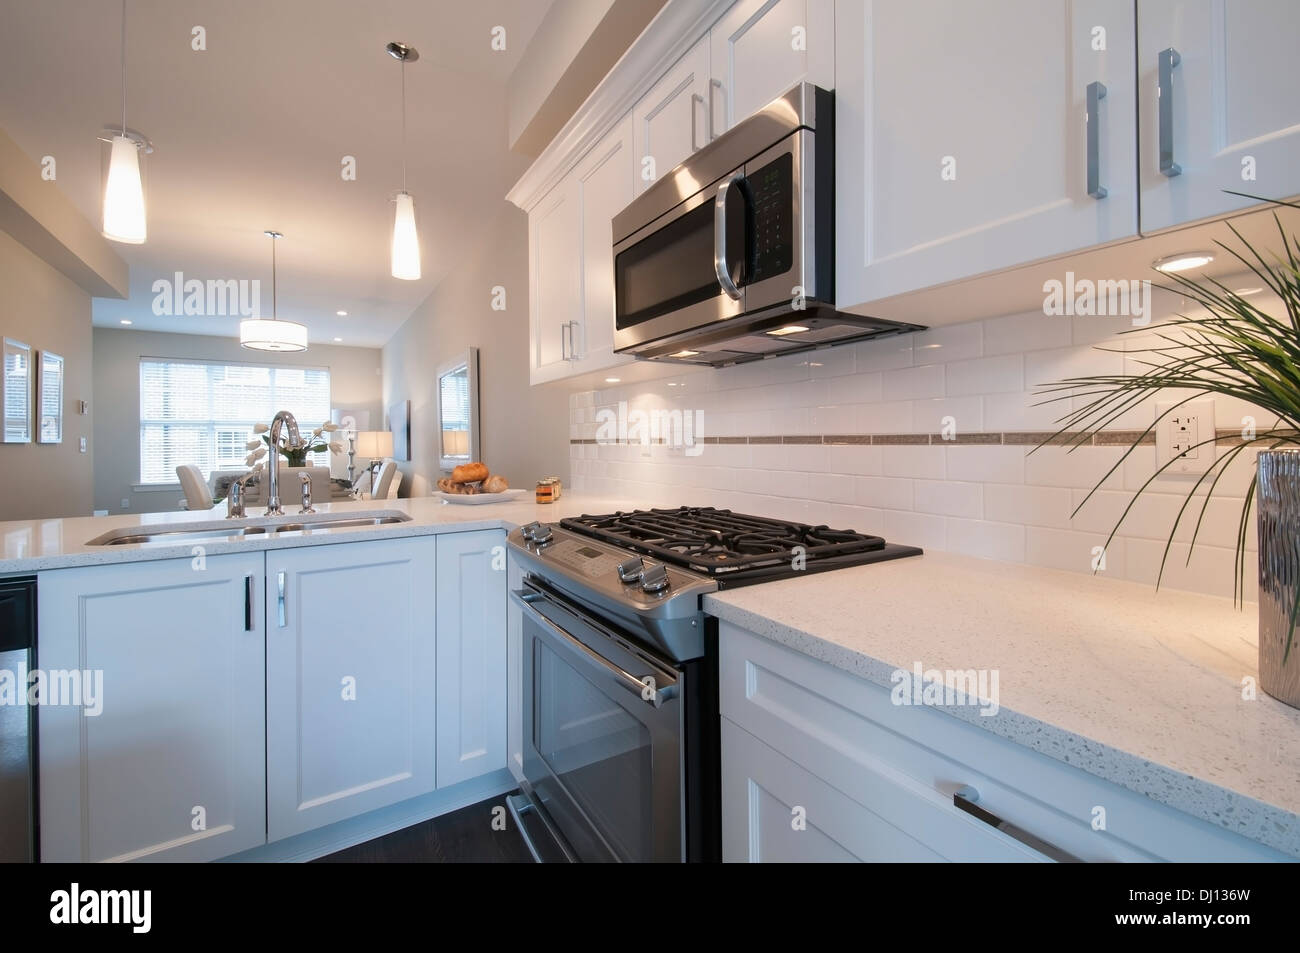 Stove And Built-In Microwave Oven In Modern Kitchen; Surrey, British  Columbia, Canada Stock Photo - Alamy